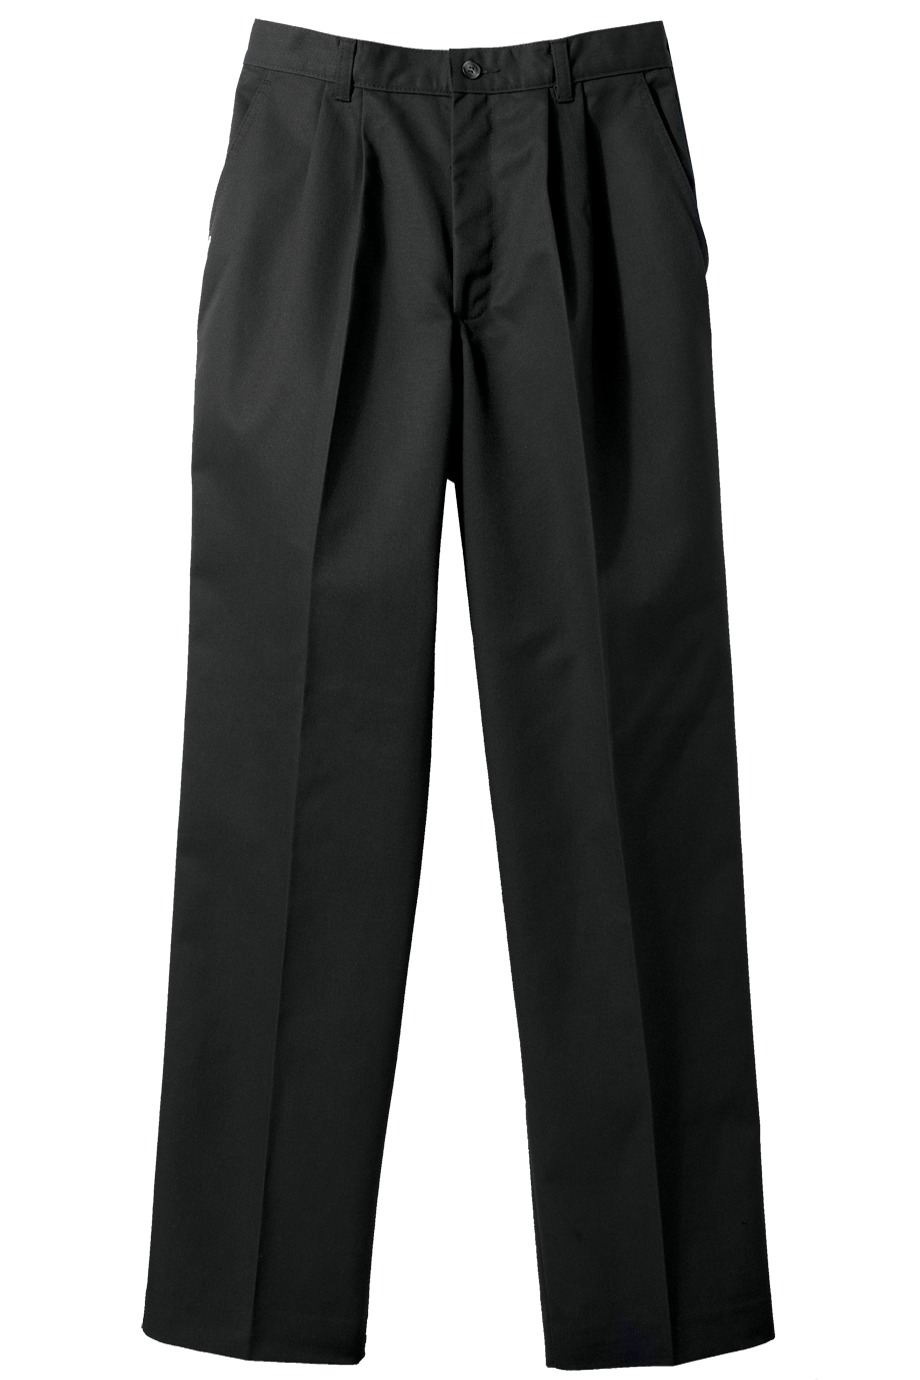 Edwards Garment 8679 - Women's Blended Chino Pleated Pant